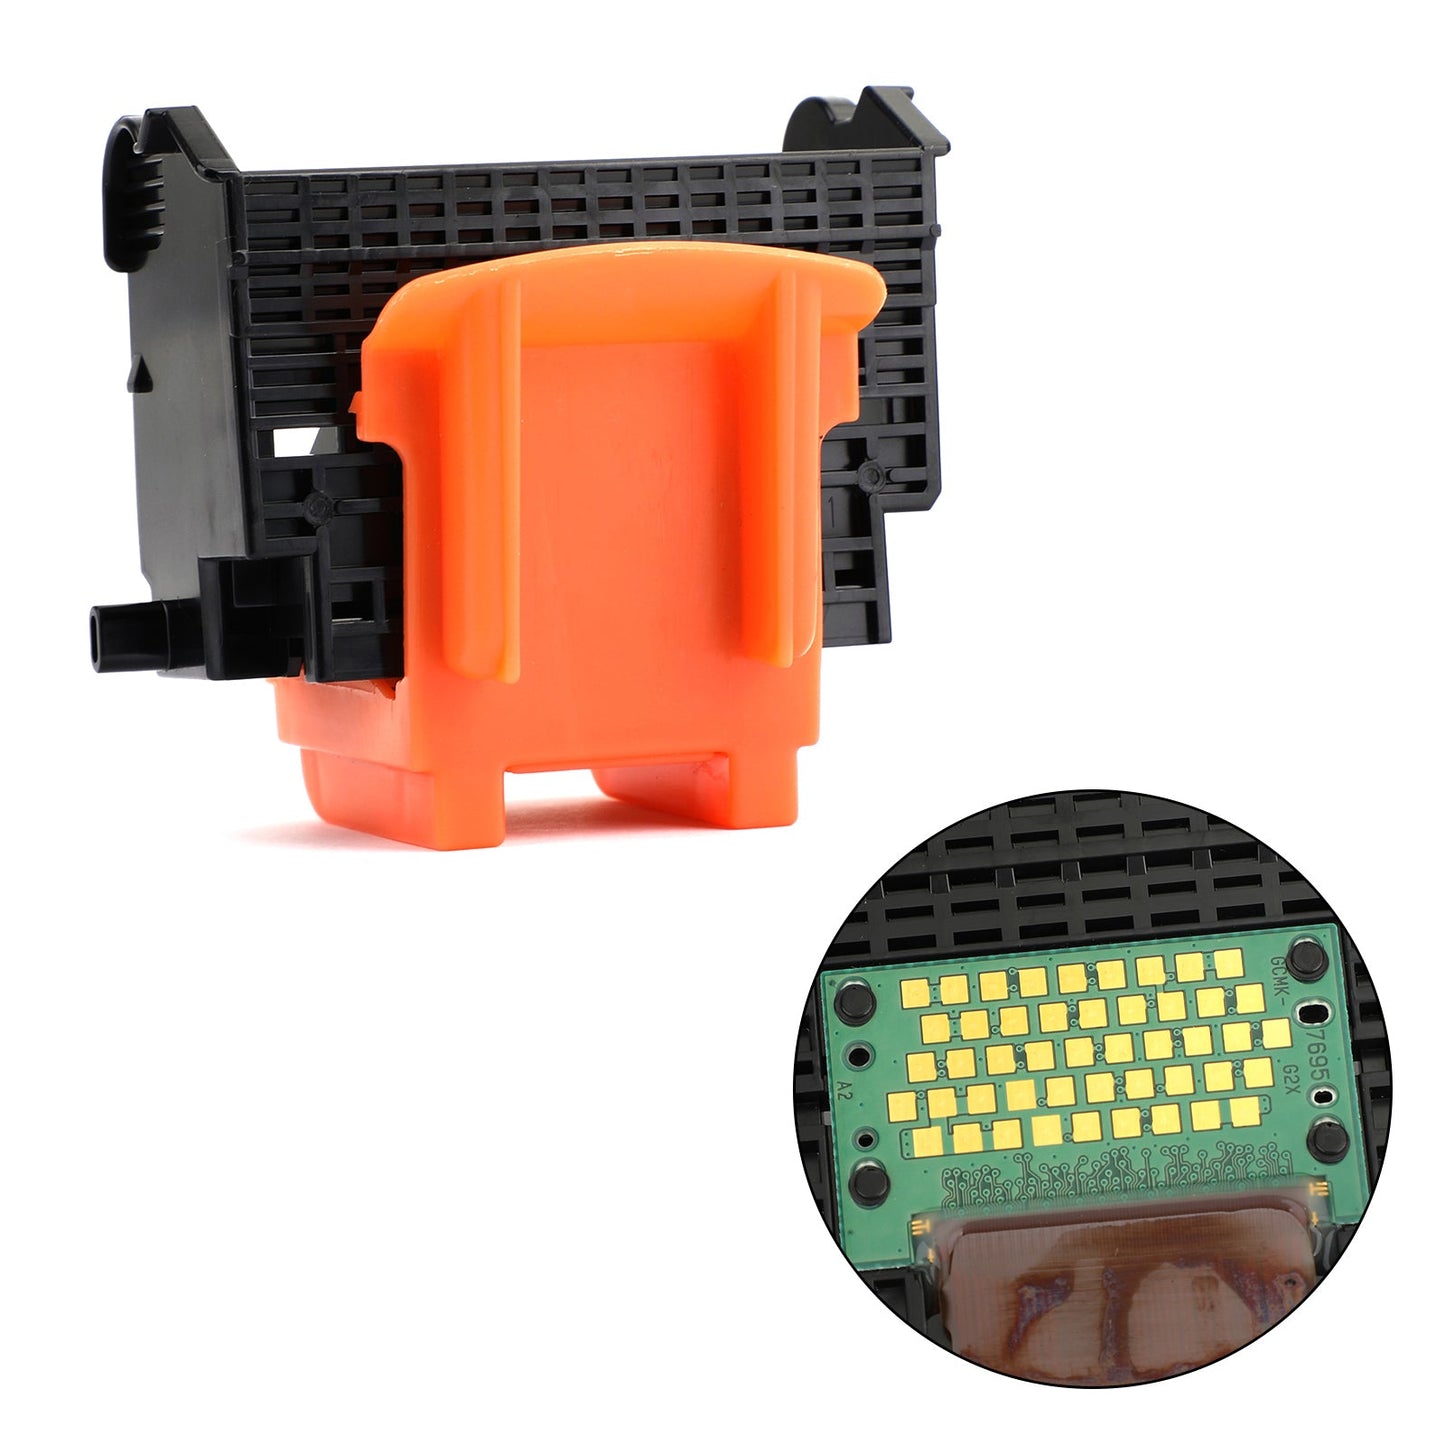 Replacement Printer Print Head QY6-0067 For Ip4500 MP610 MP810 IP5300 MX850,Full Color Replacement Printhead QY6-0067 For Ip4500 MP610 MP810 IP5300 MX850,Reufrbished Printer Print Head for Ip4500 MP610 MP810 IP5300 MX850 QY6-0067